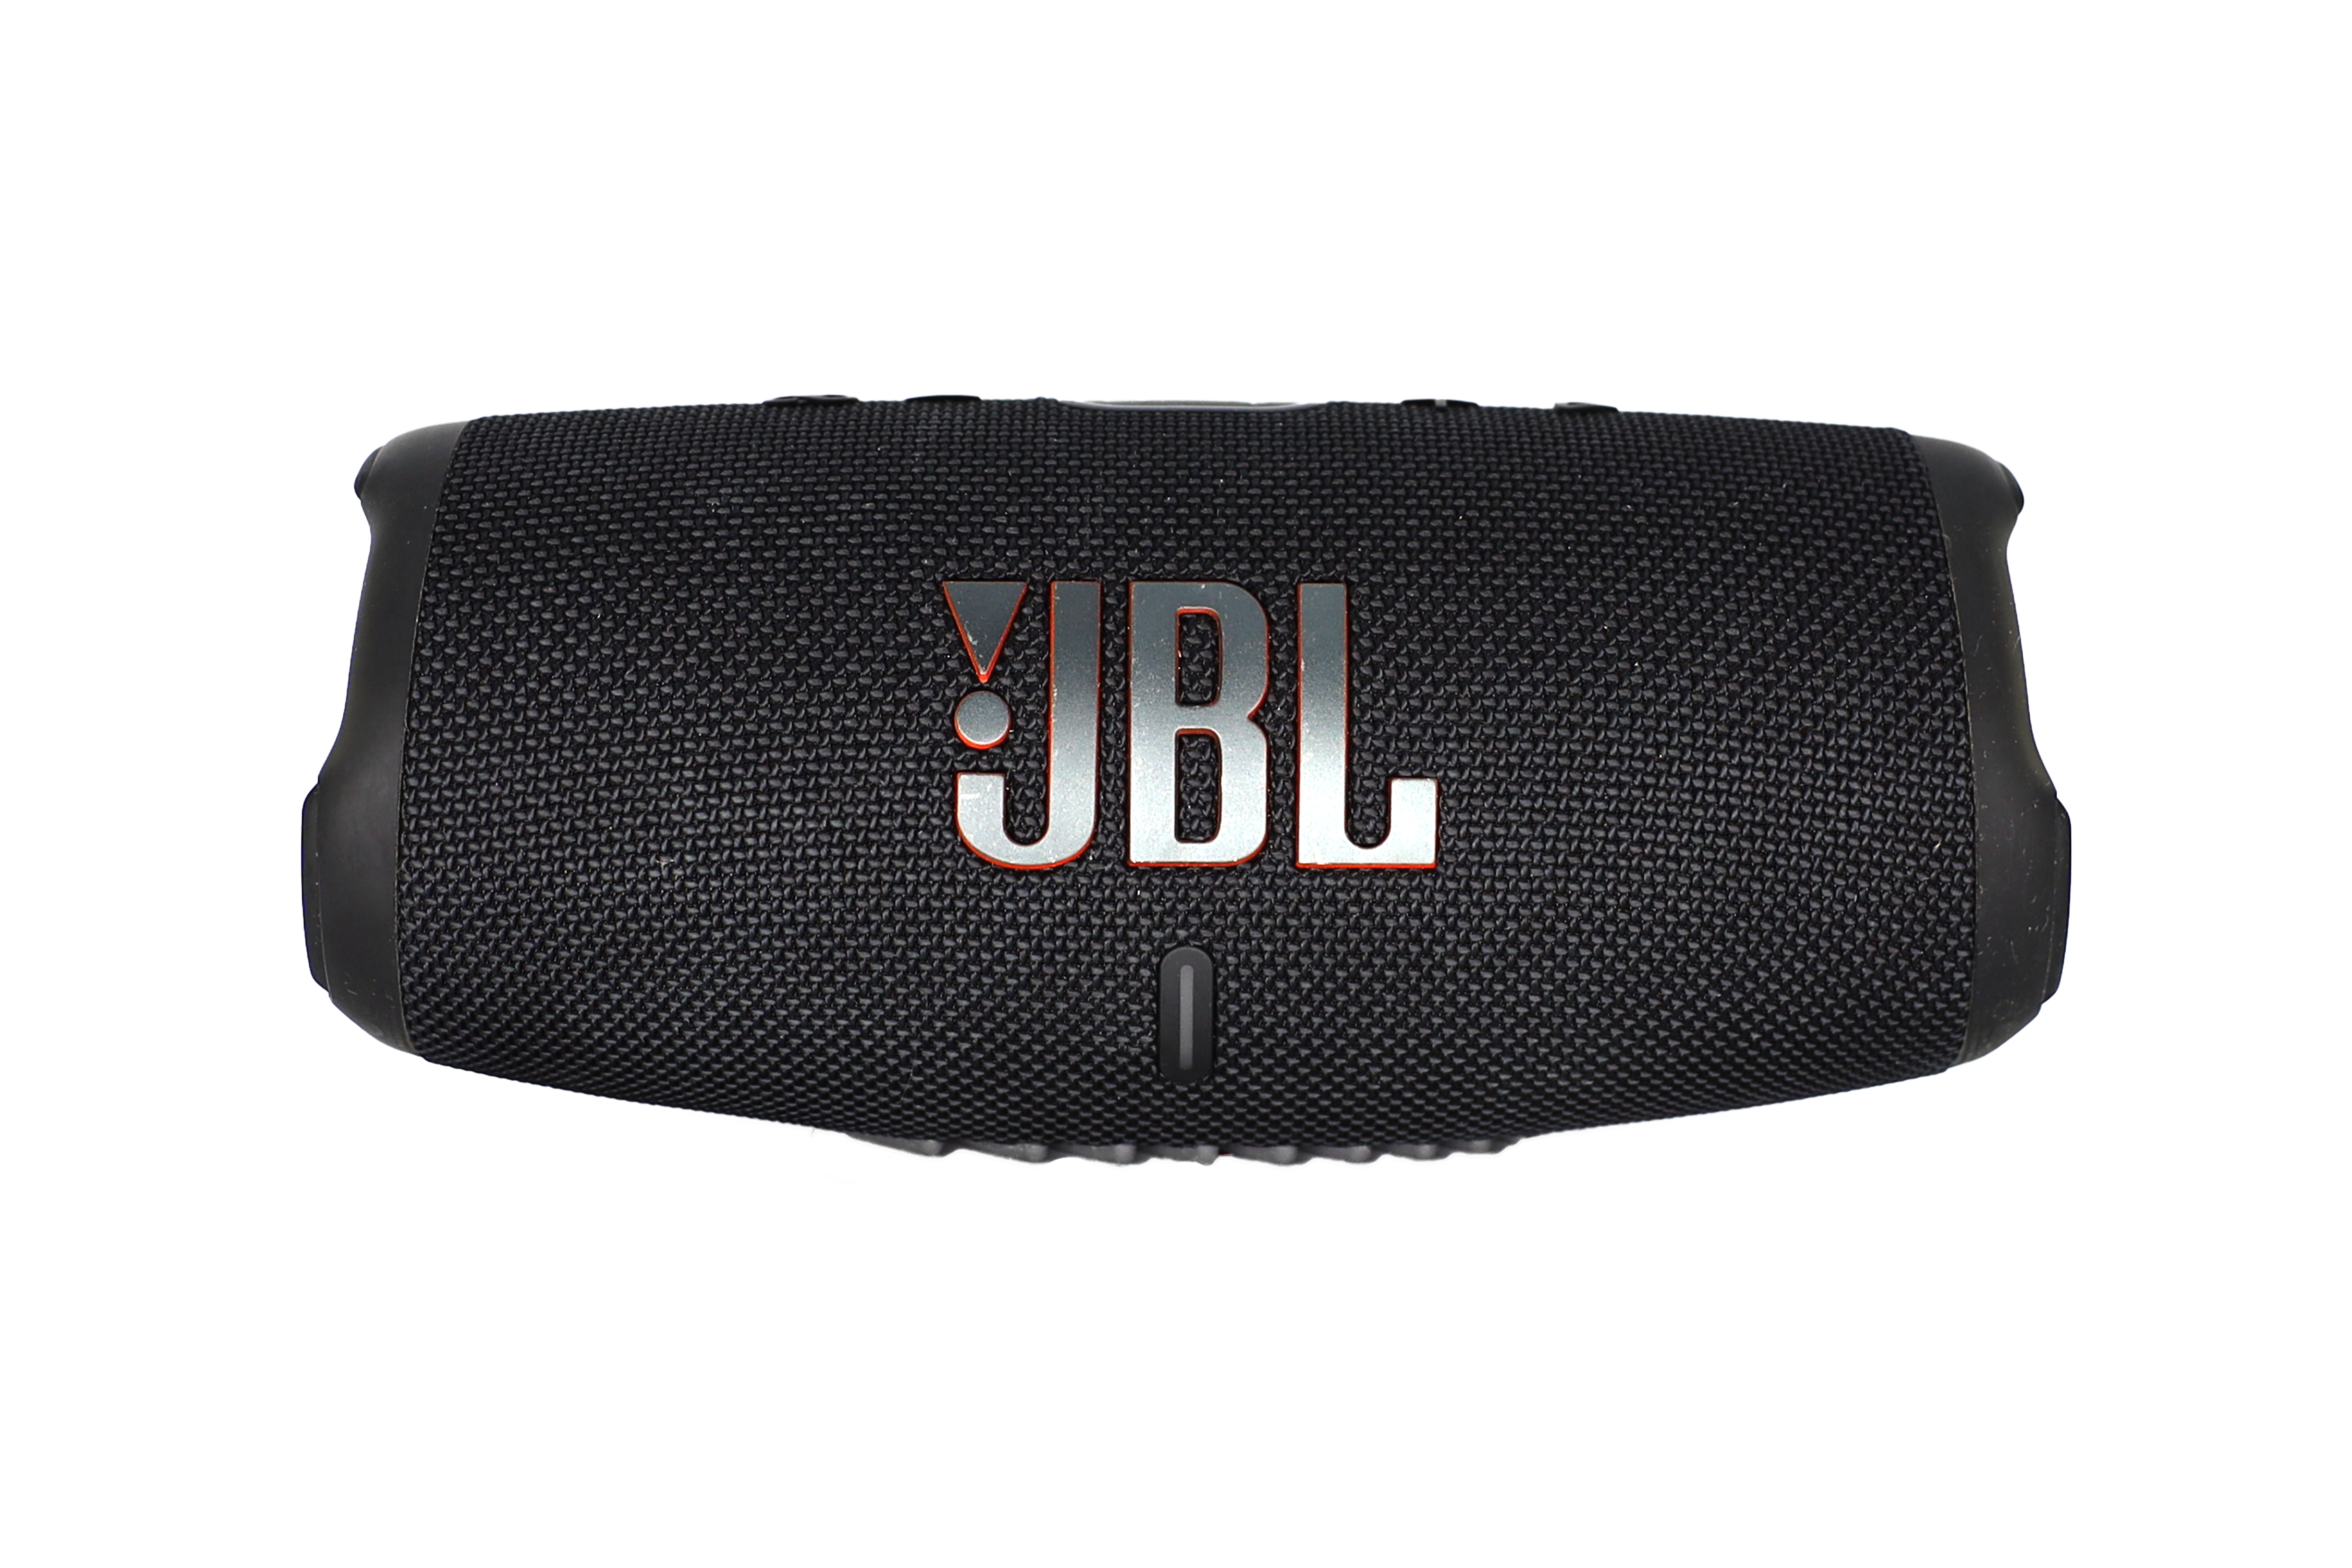 Charge Rent Portable Speaker €10.90 month Bluetooth from 5 JBL per